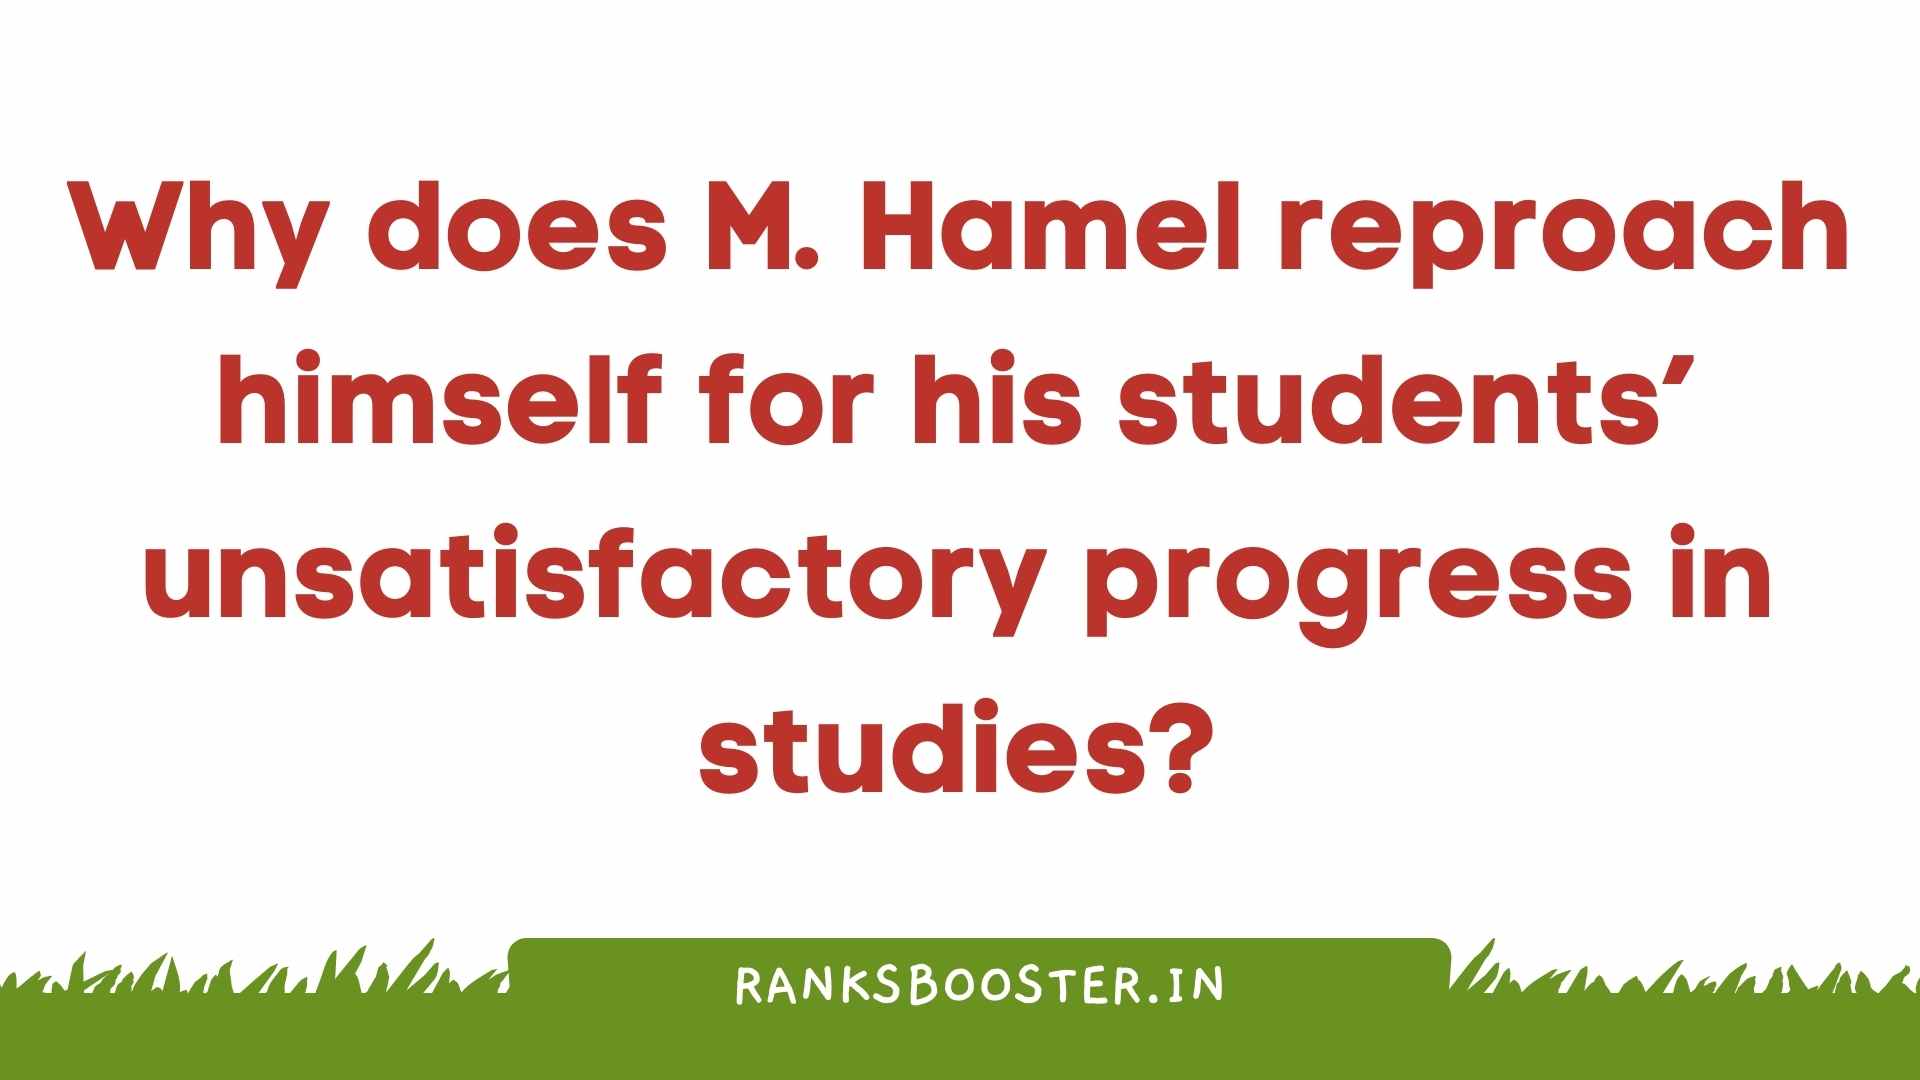 Why does M. Hamel reproach himself for his students’ unsatisfactory progress in studies?